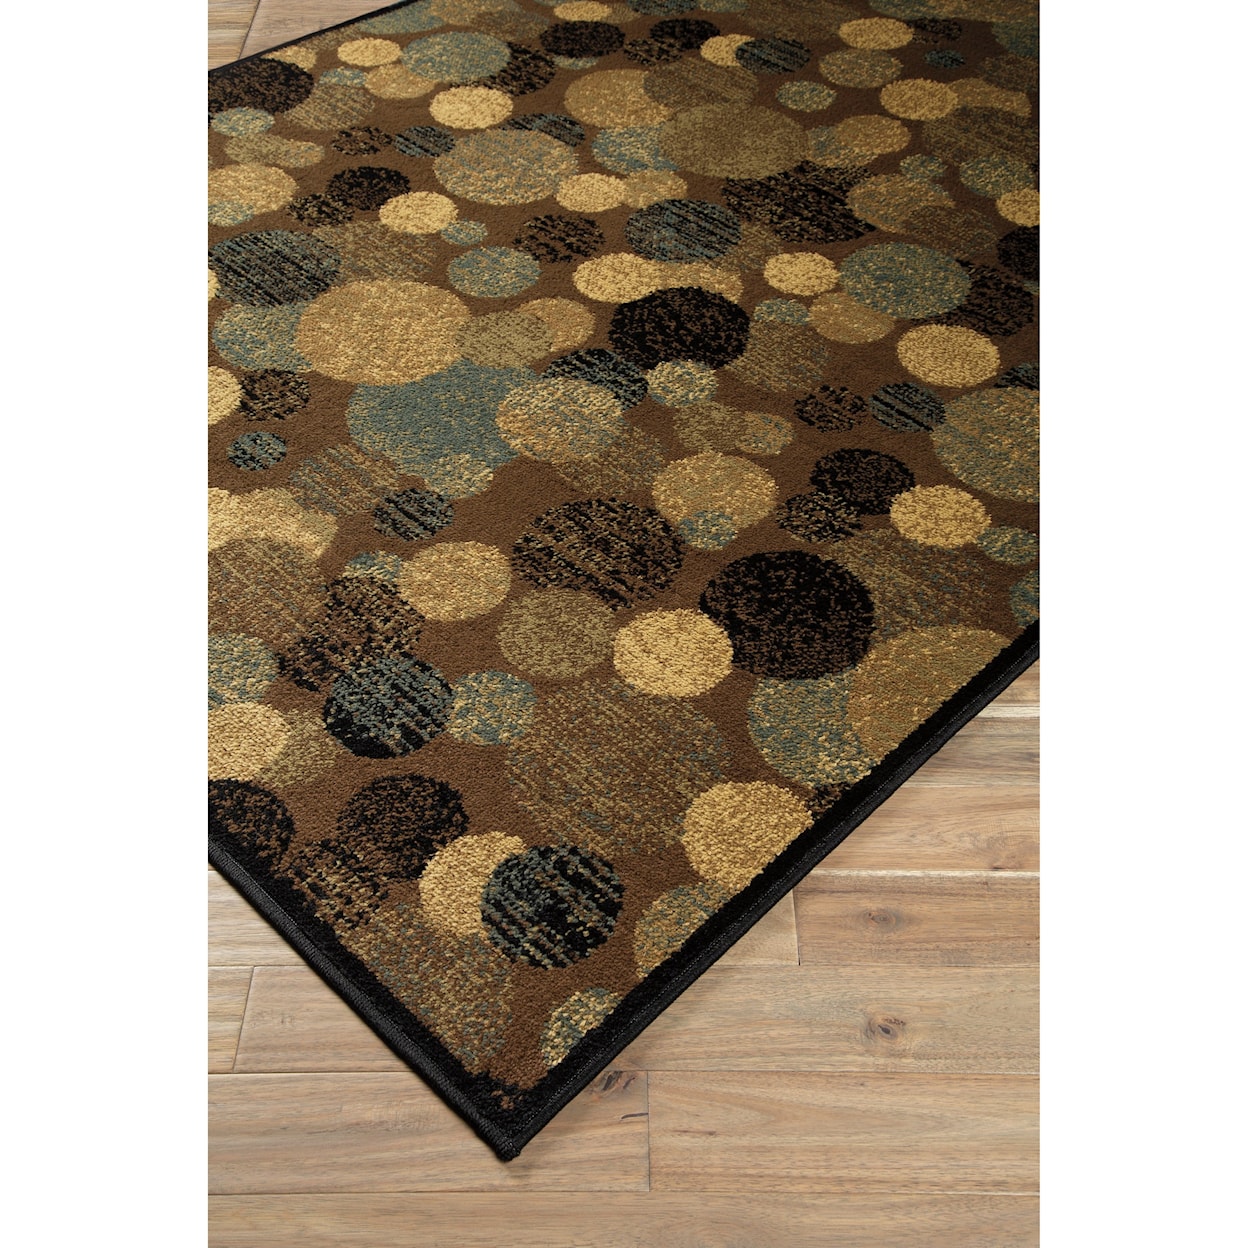 Signature Design Contemporary Area Rugs Vance Brown Large Rug